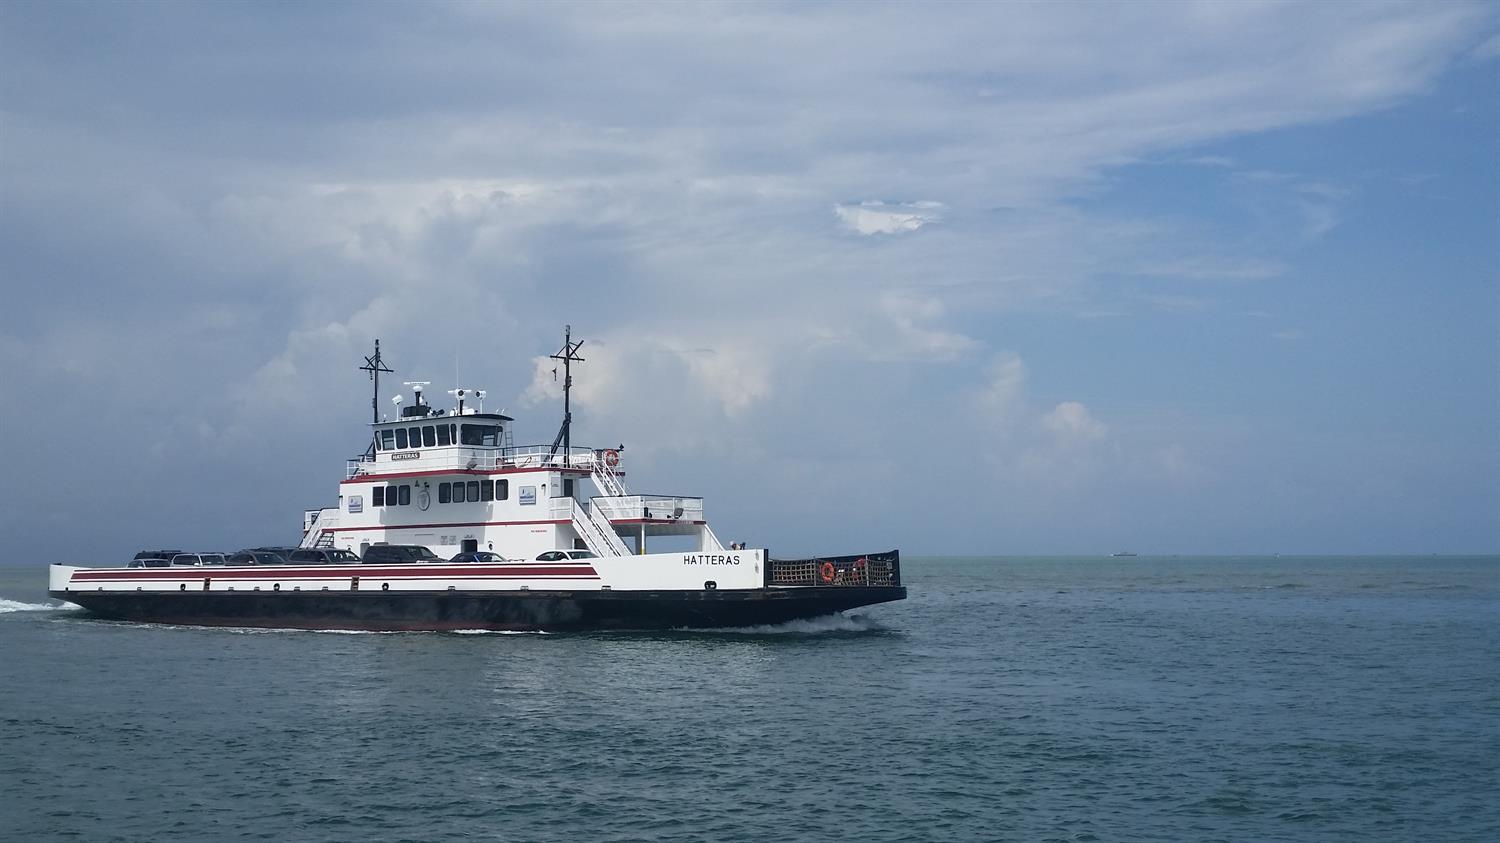 Ocracoke ferry routes shift to springtime schedules on March 7